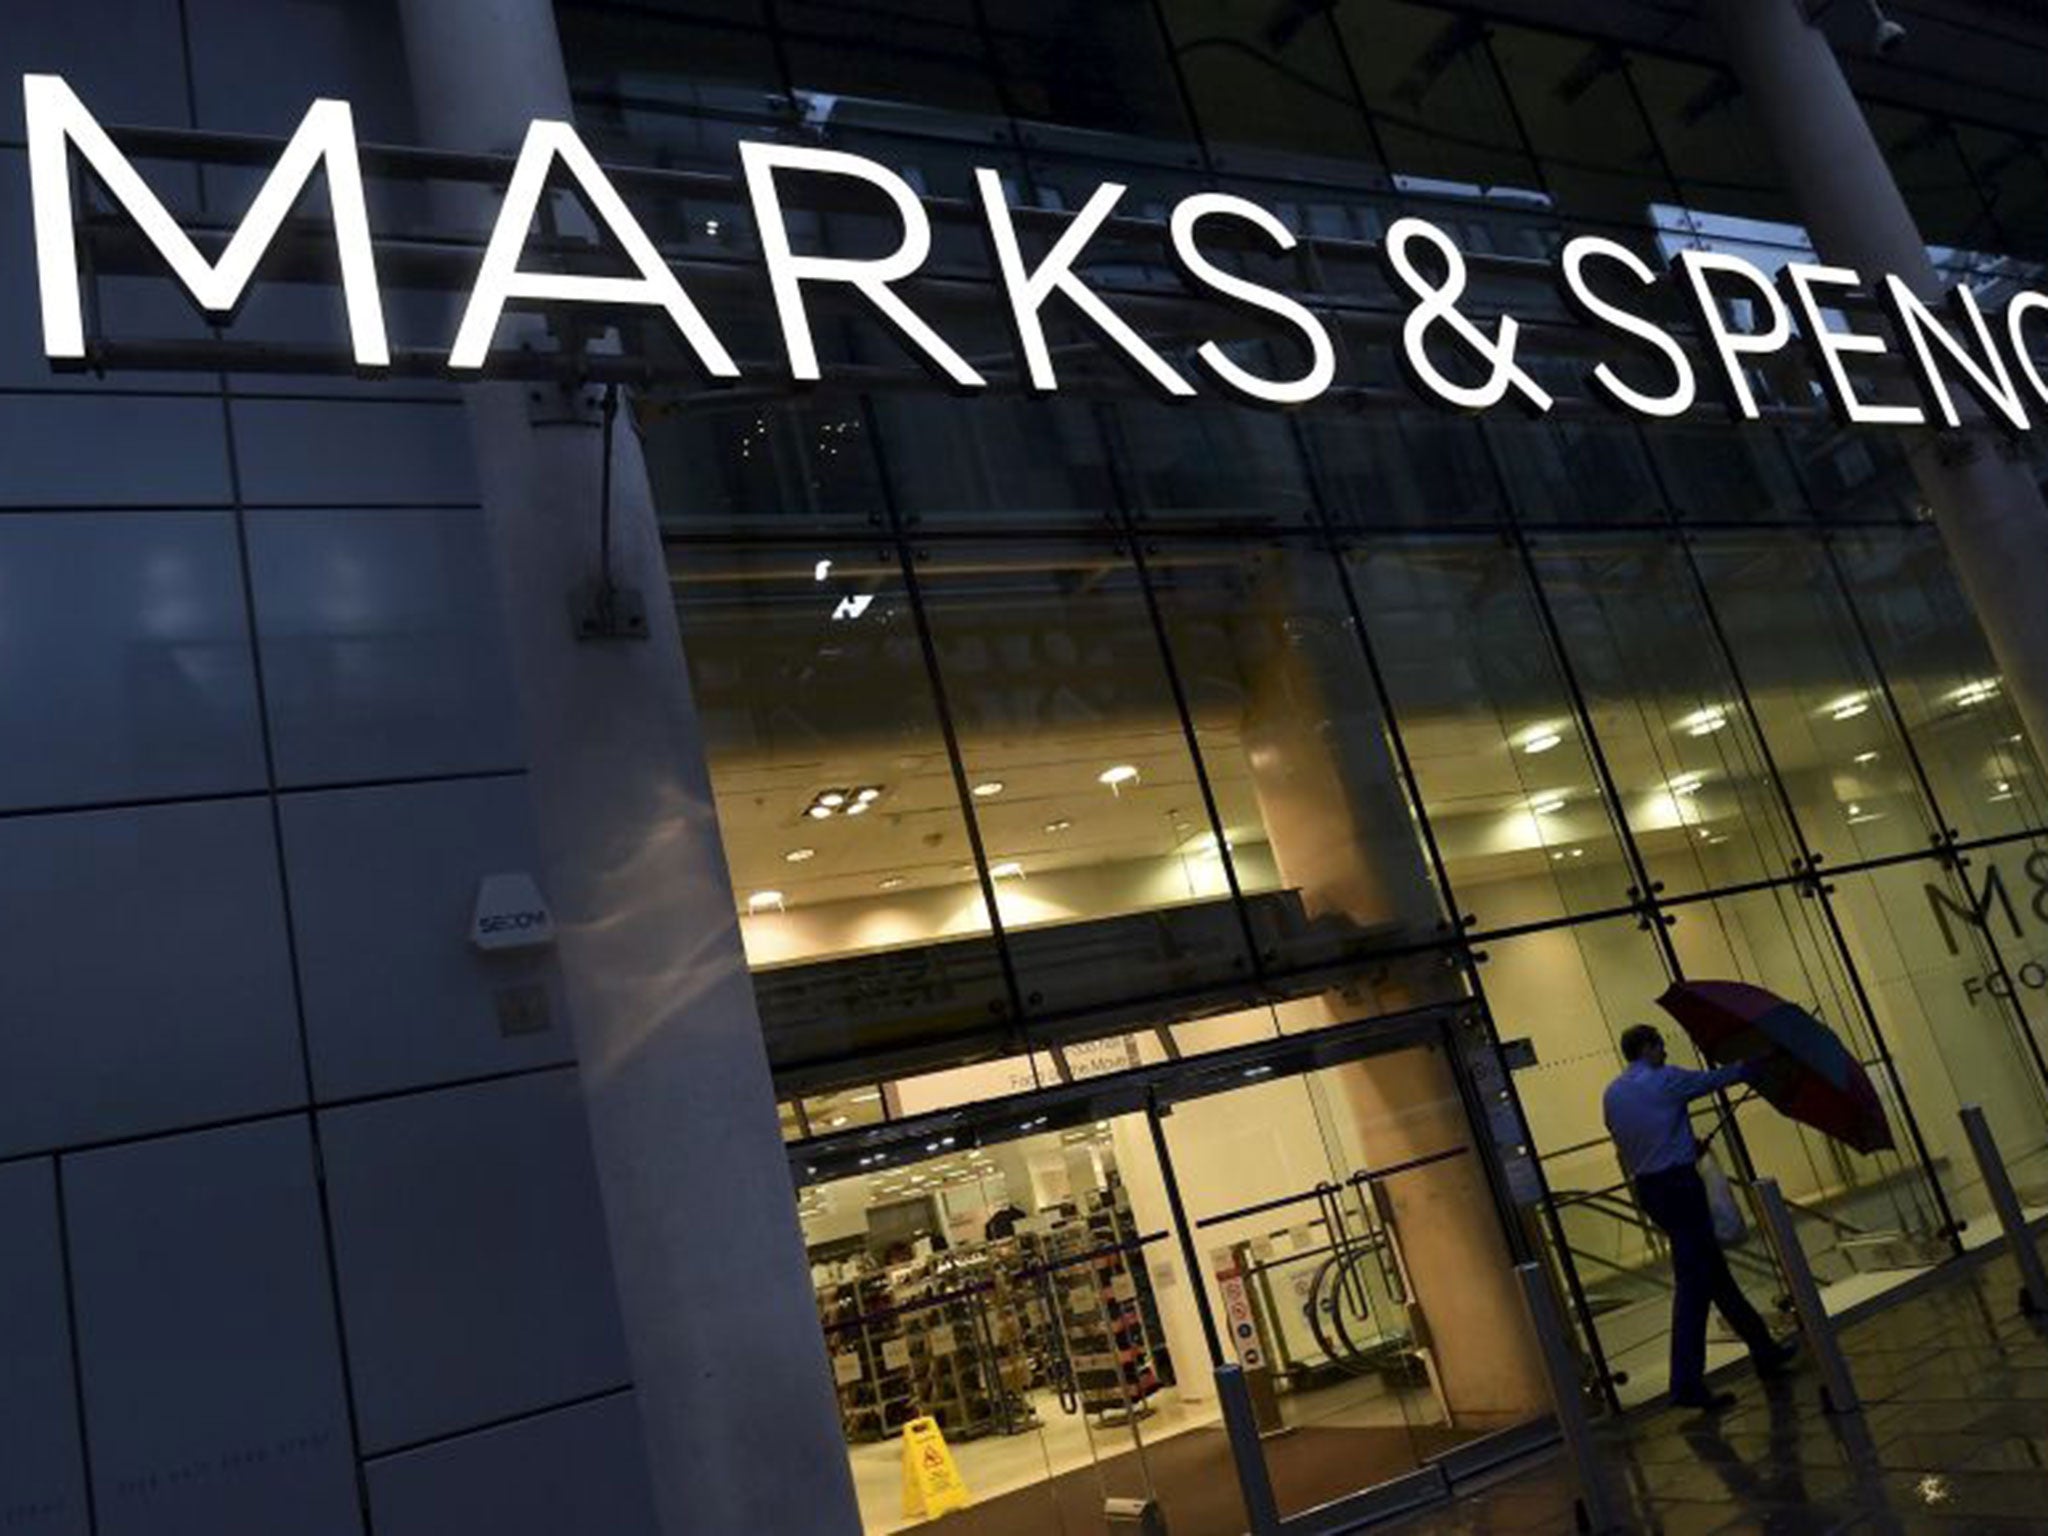 New openings will focus on food, a business M&S has made a consistent success of